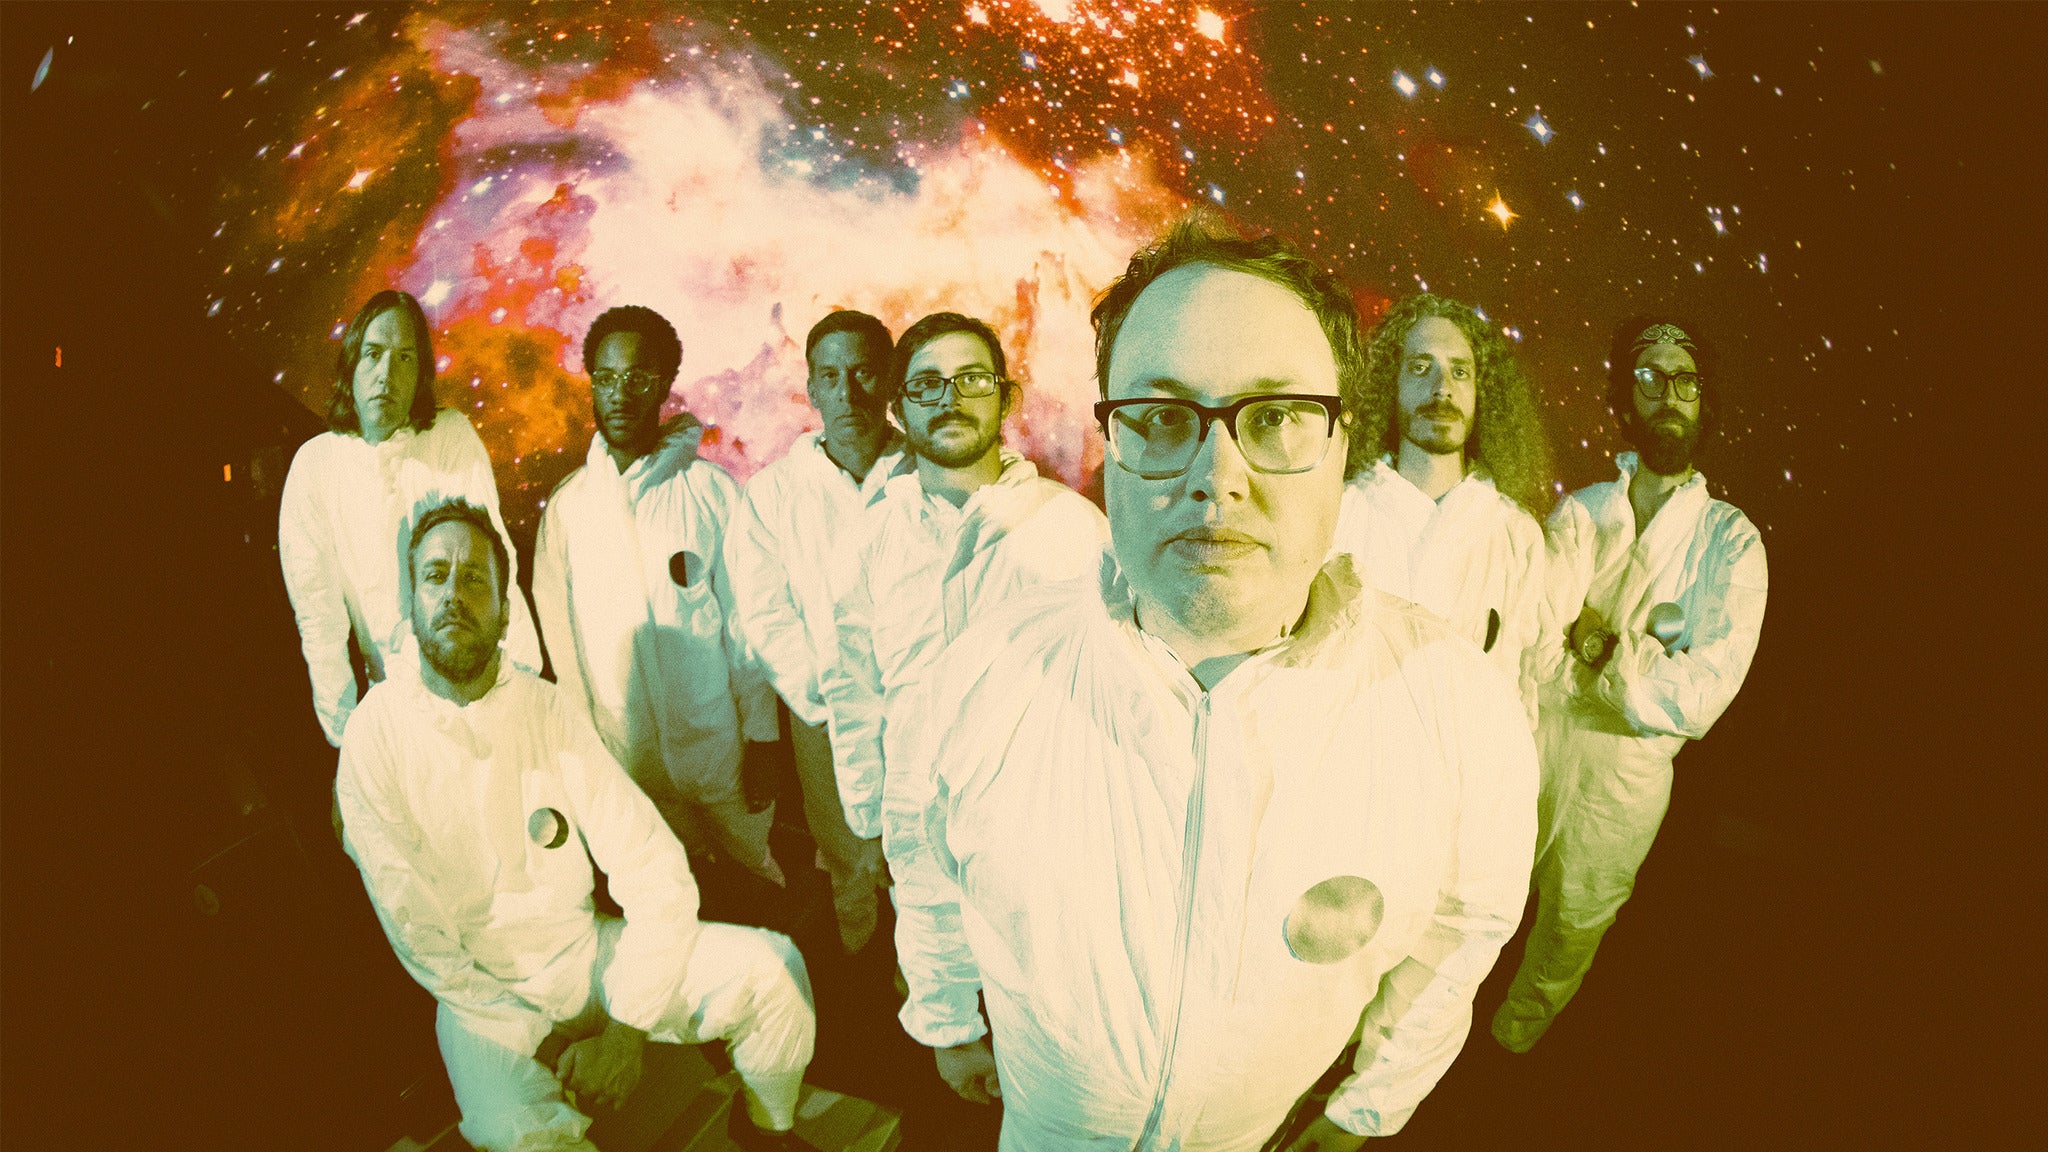 St. Paul and the Broken Bones with special guest Danielle Ponder in San Diego promo photo for Spotify presale offer code